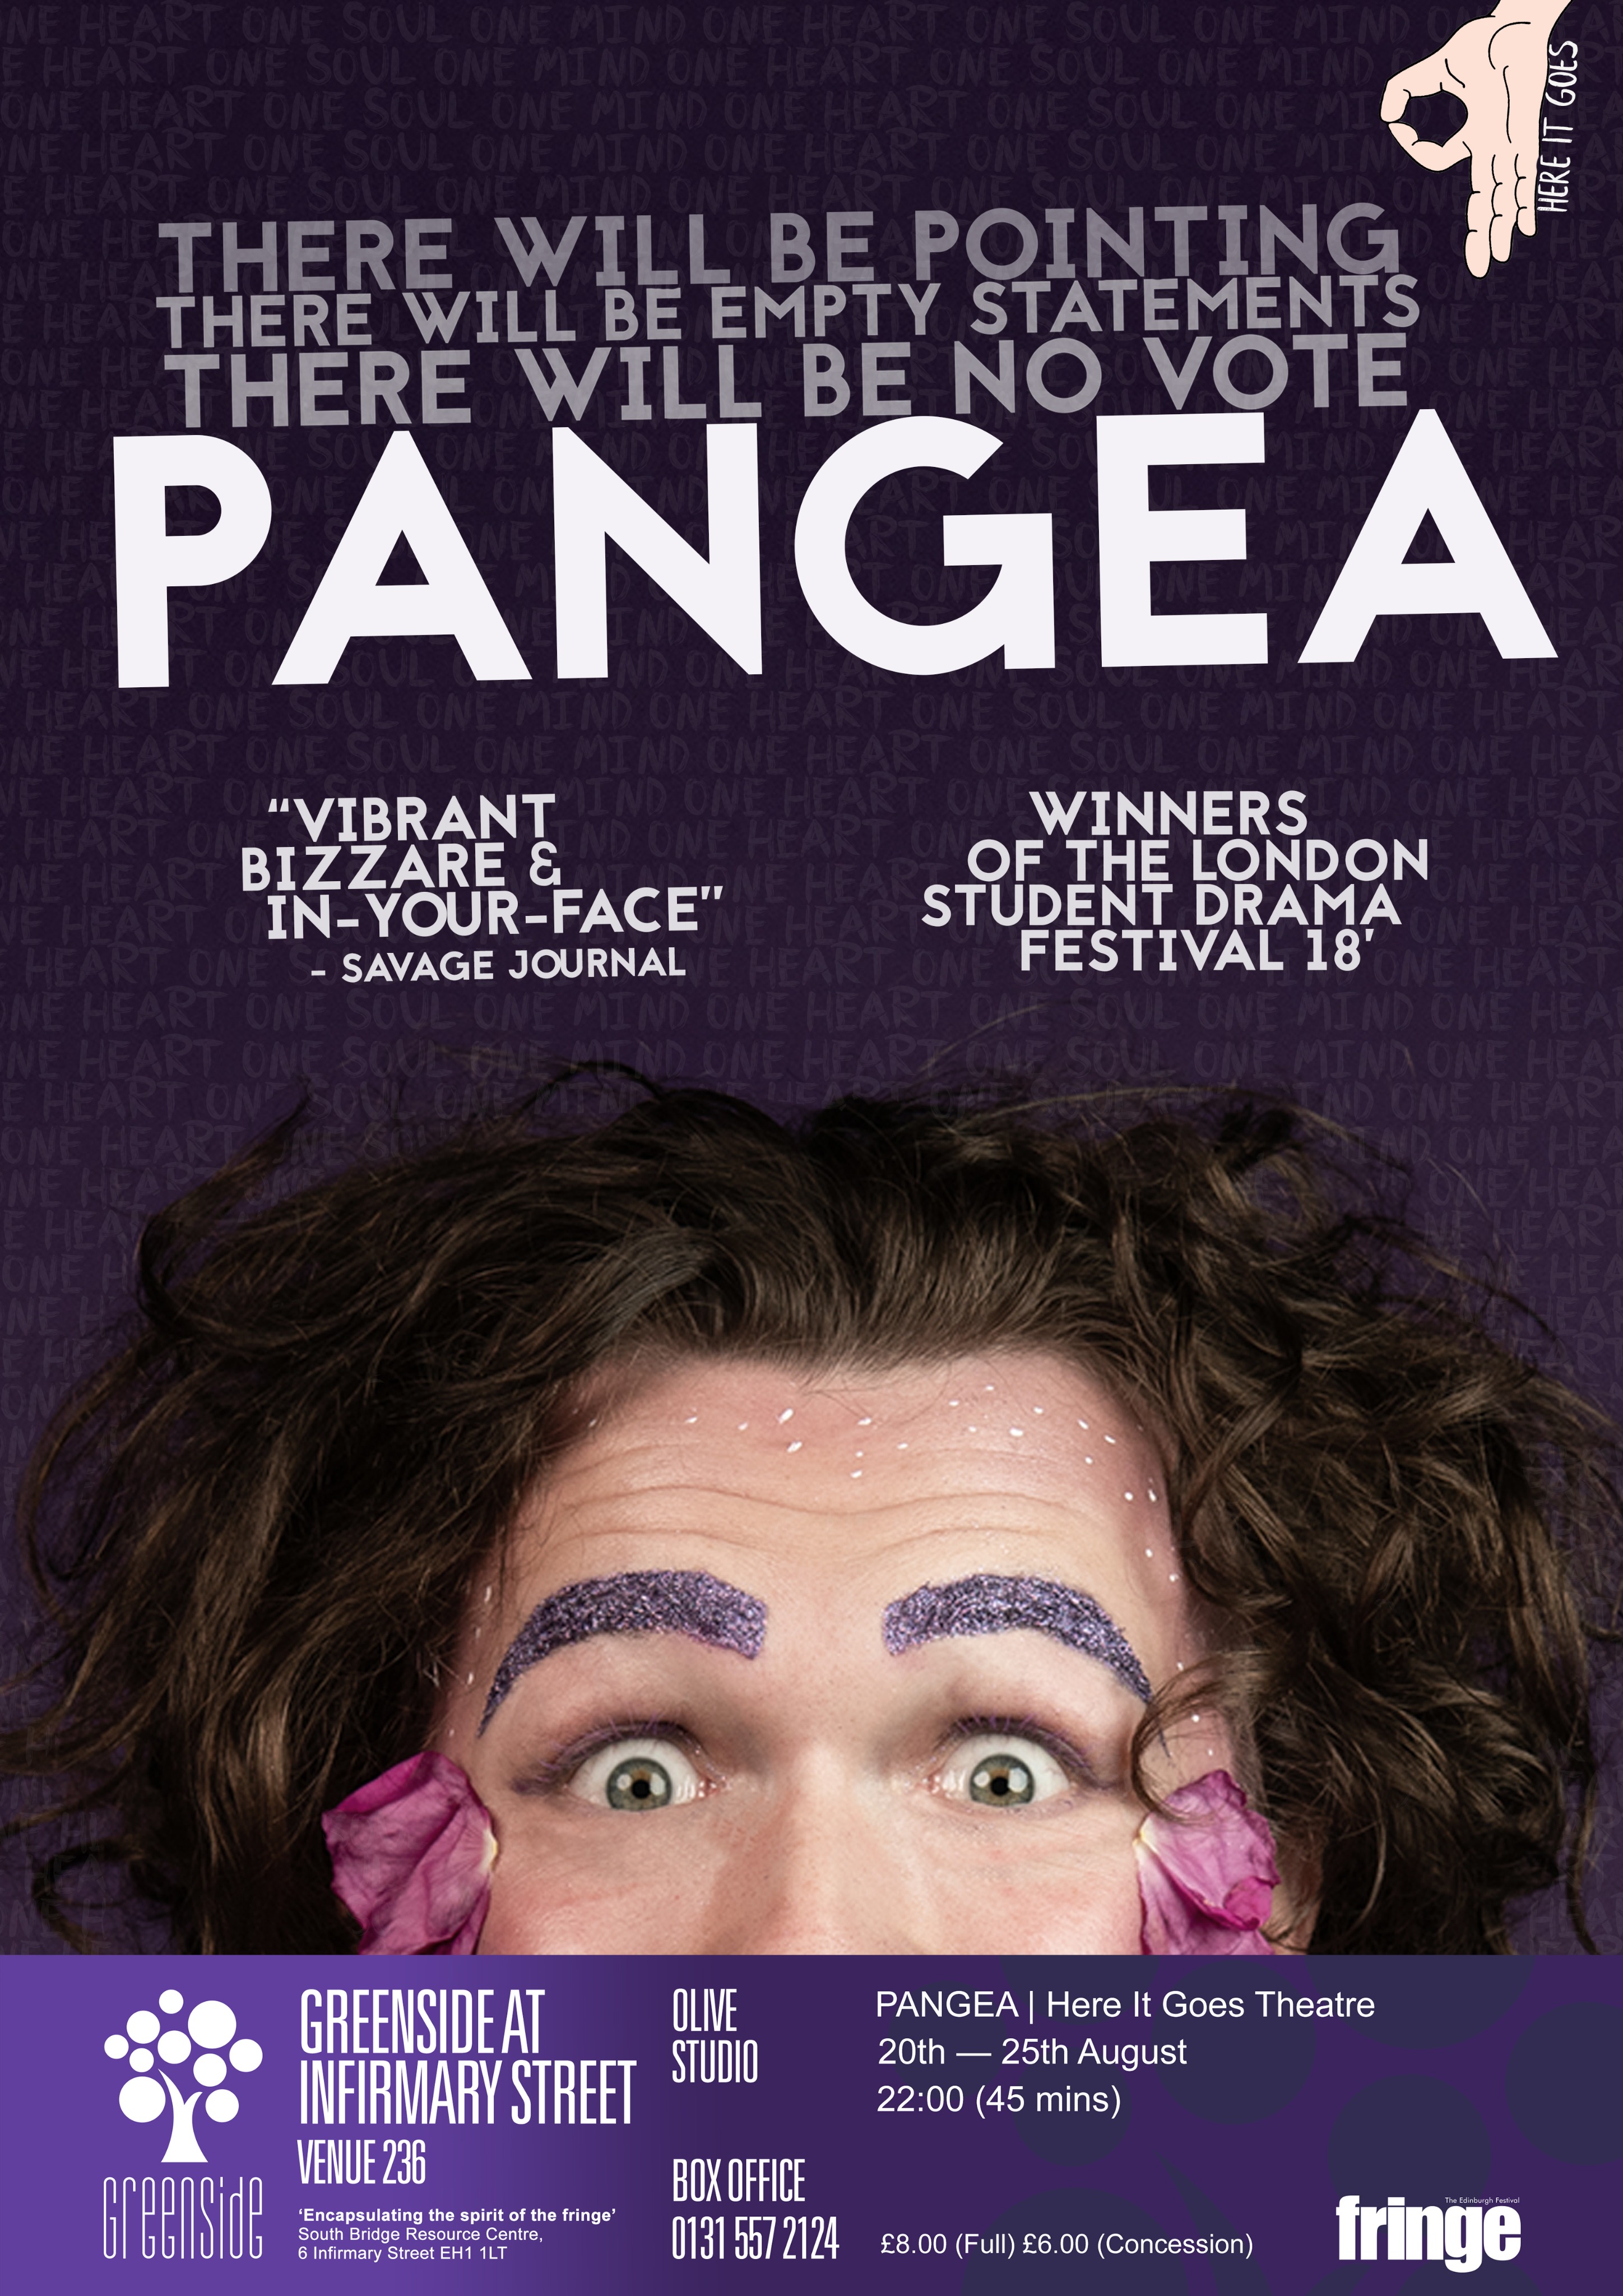 The poster for Pangea